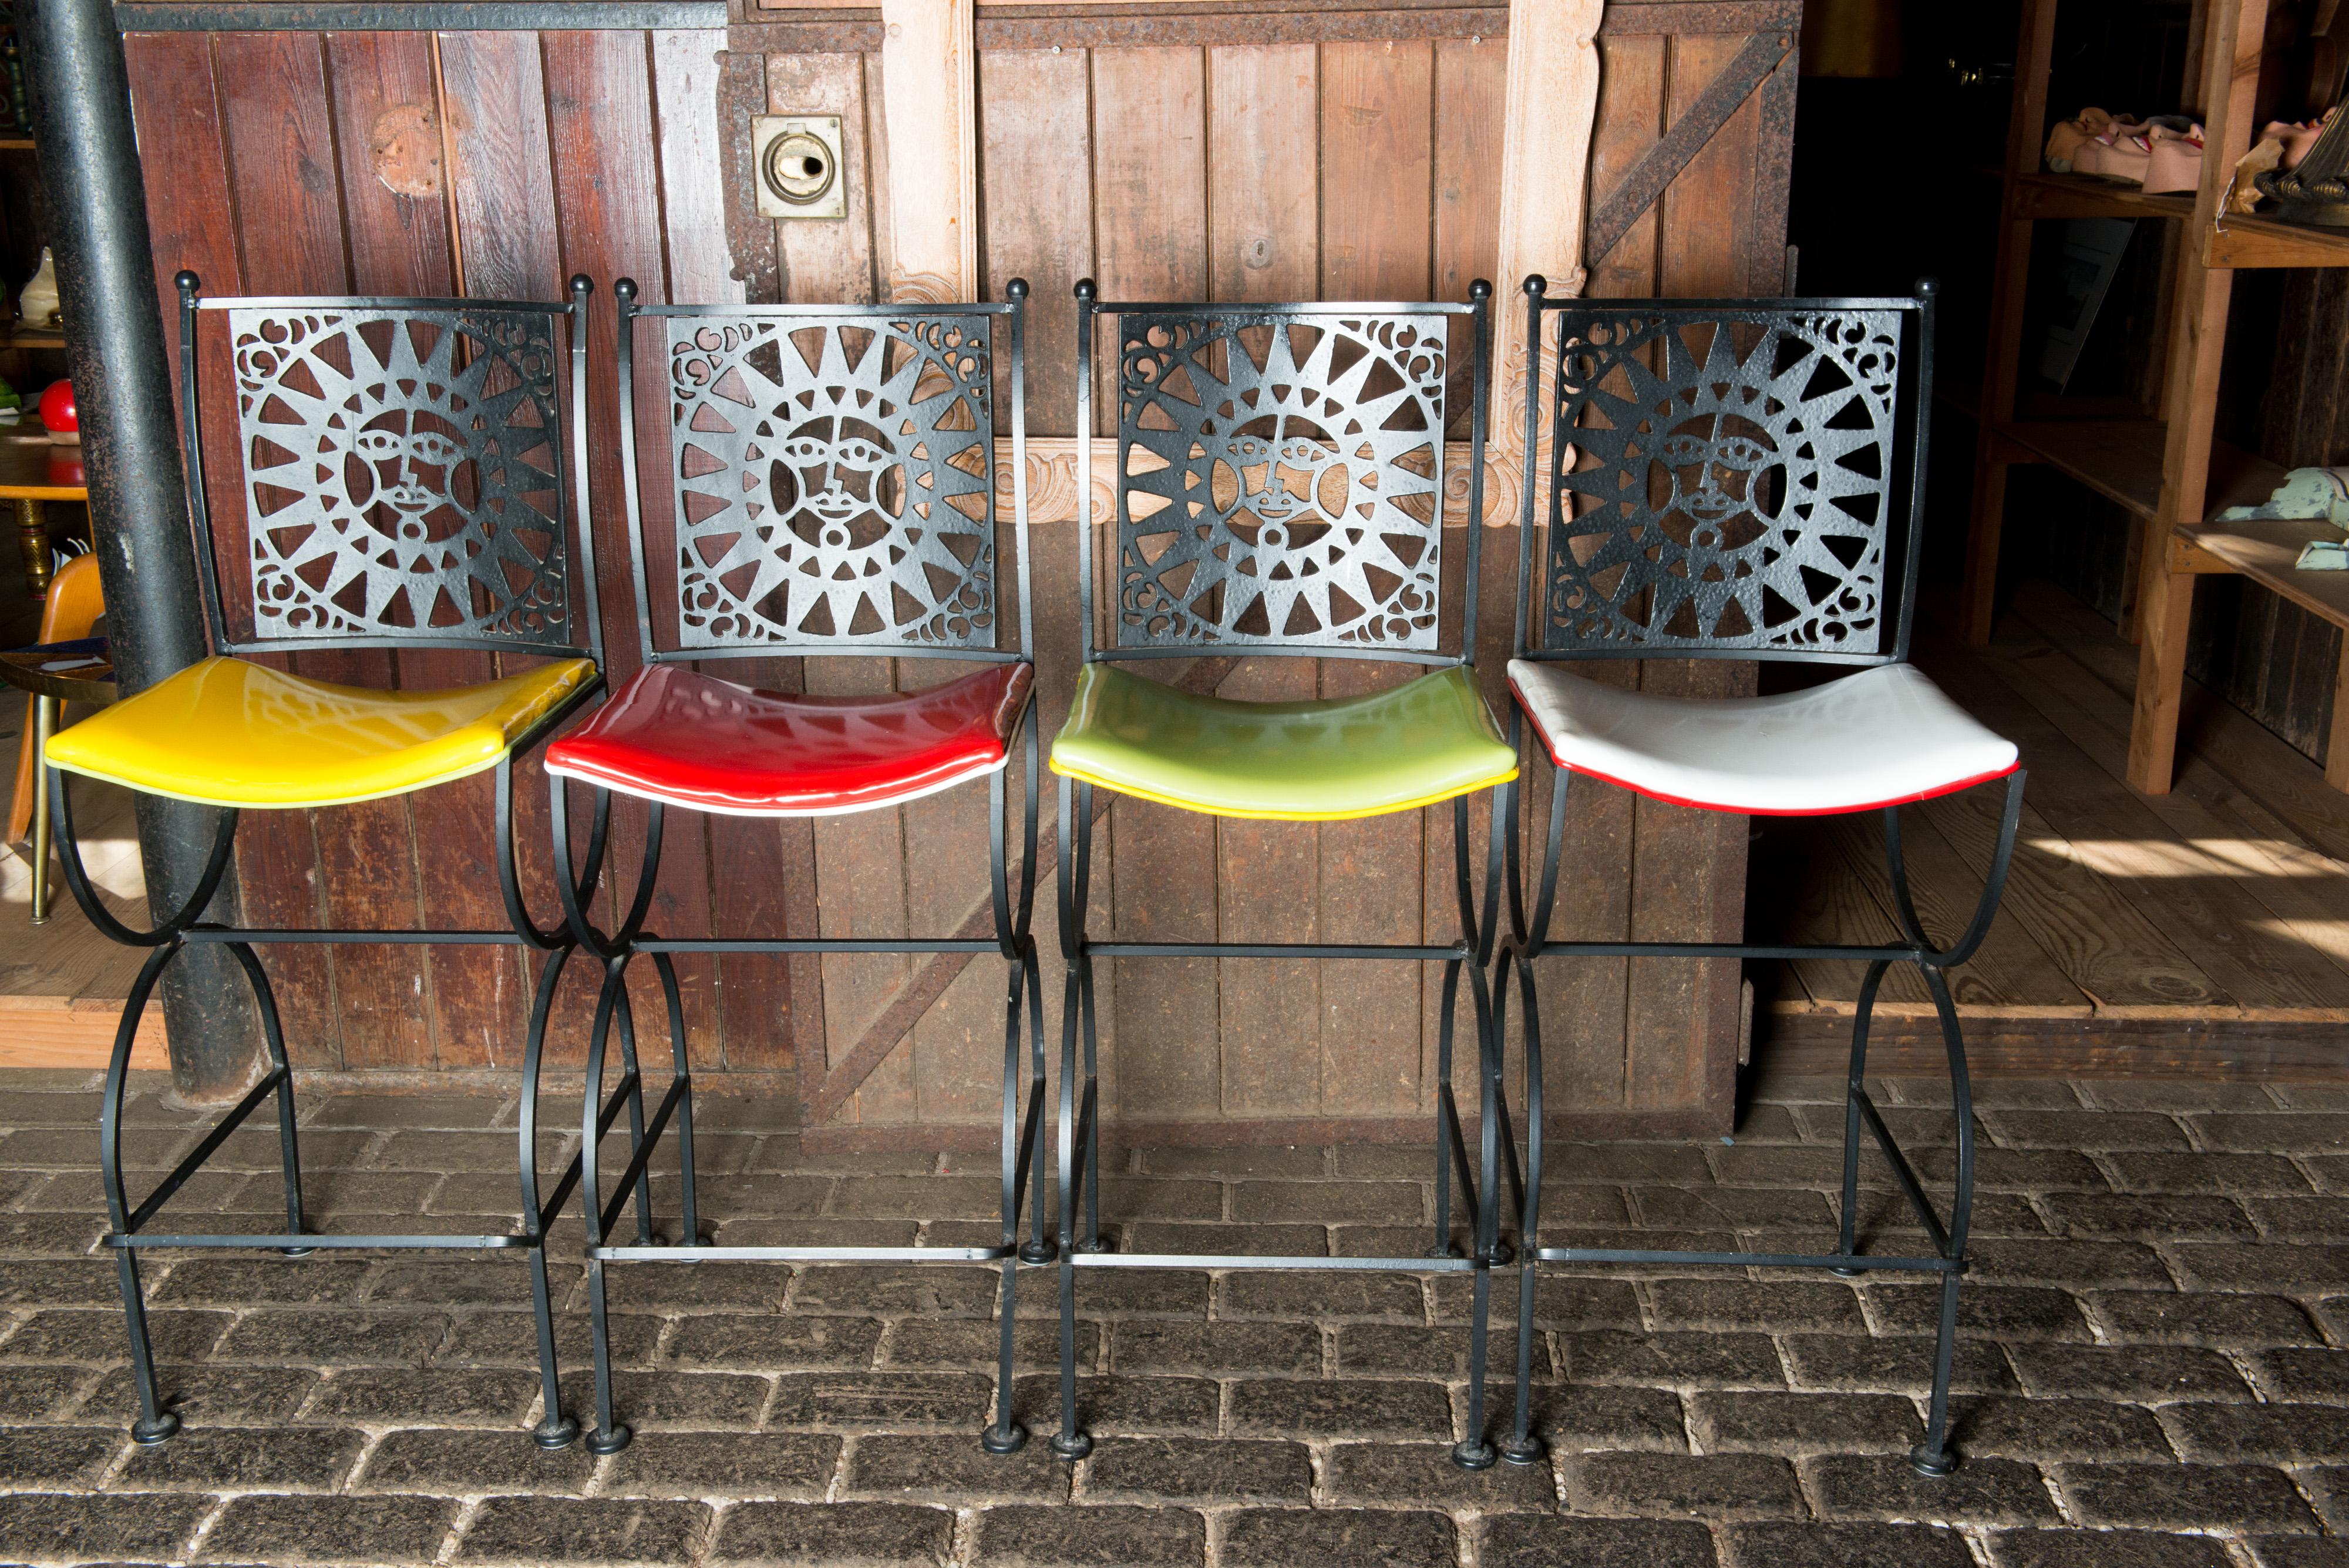 A set of four mid-century Mayan sun face back iron bar stools by Arthur Umanoff for Shaver Howard. Two seats are red and white vinyl. Two seats are yellow and lime green. All are in very nice condition.